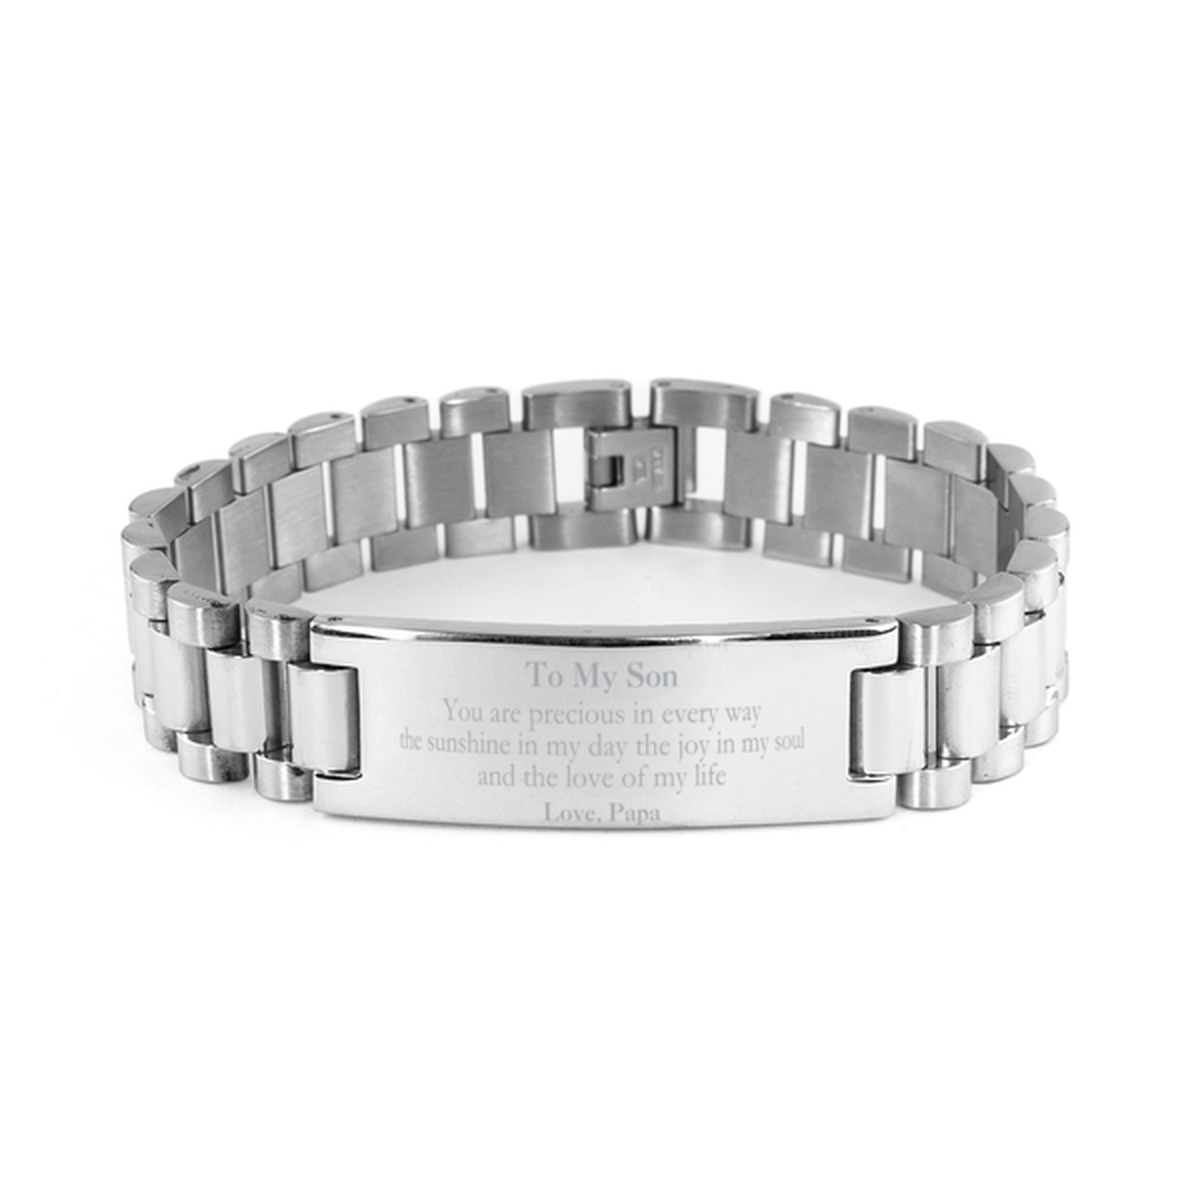 Graduation Gifts for Son Ladder Stainless Steel Bracelet Present from Papa, Christmas Son Birthday Gifts Son You are precious in every way the sunshine in my day. Love, Papa